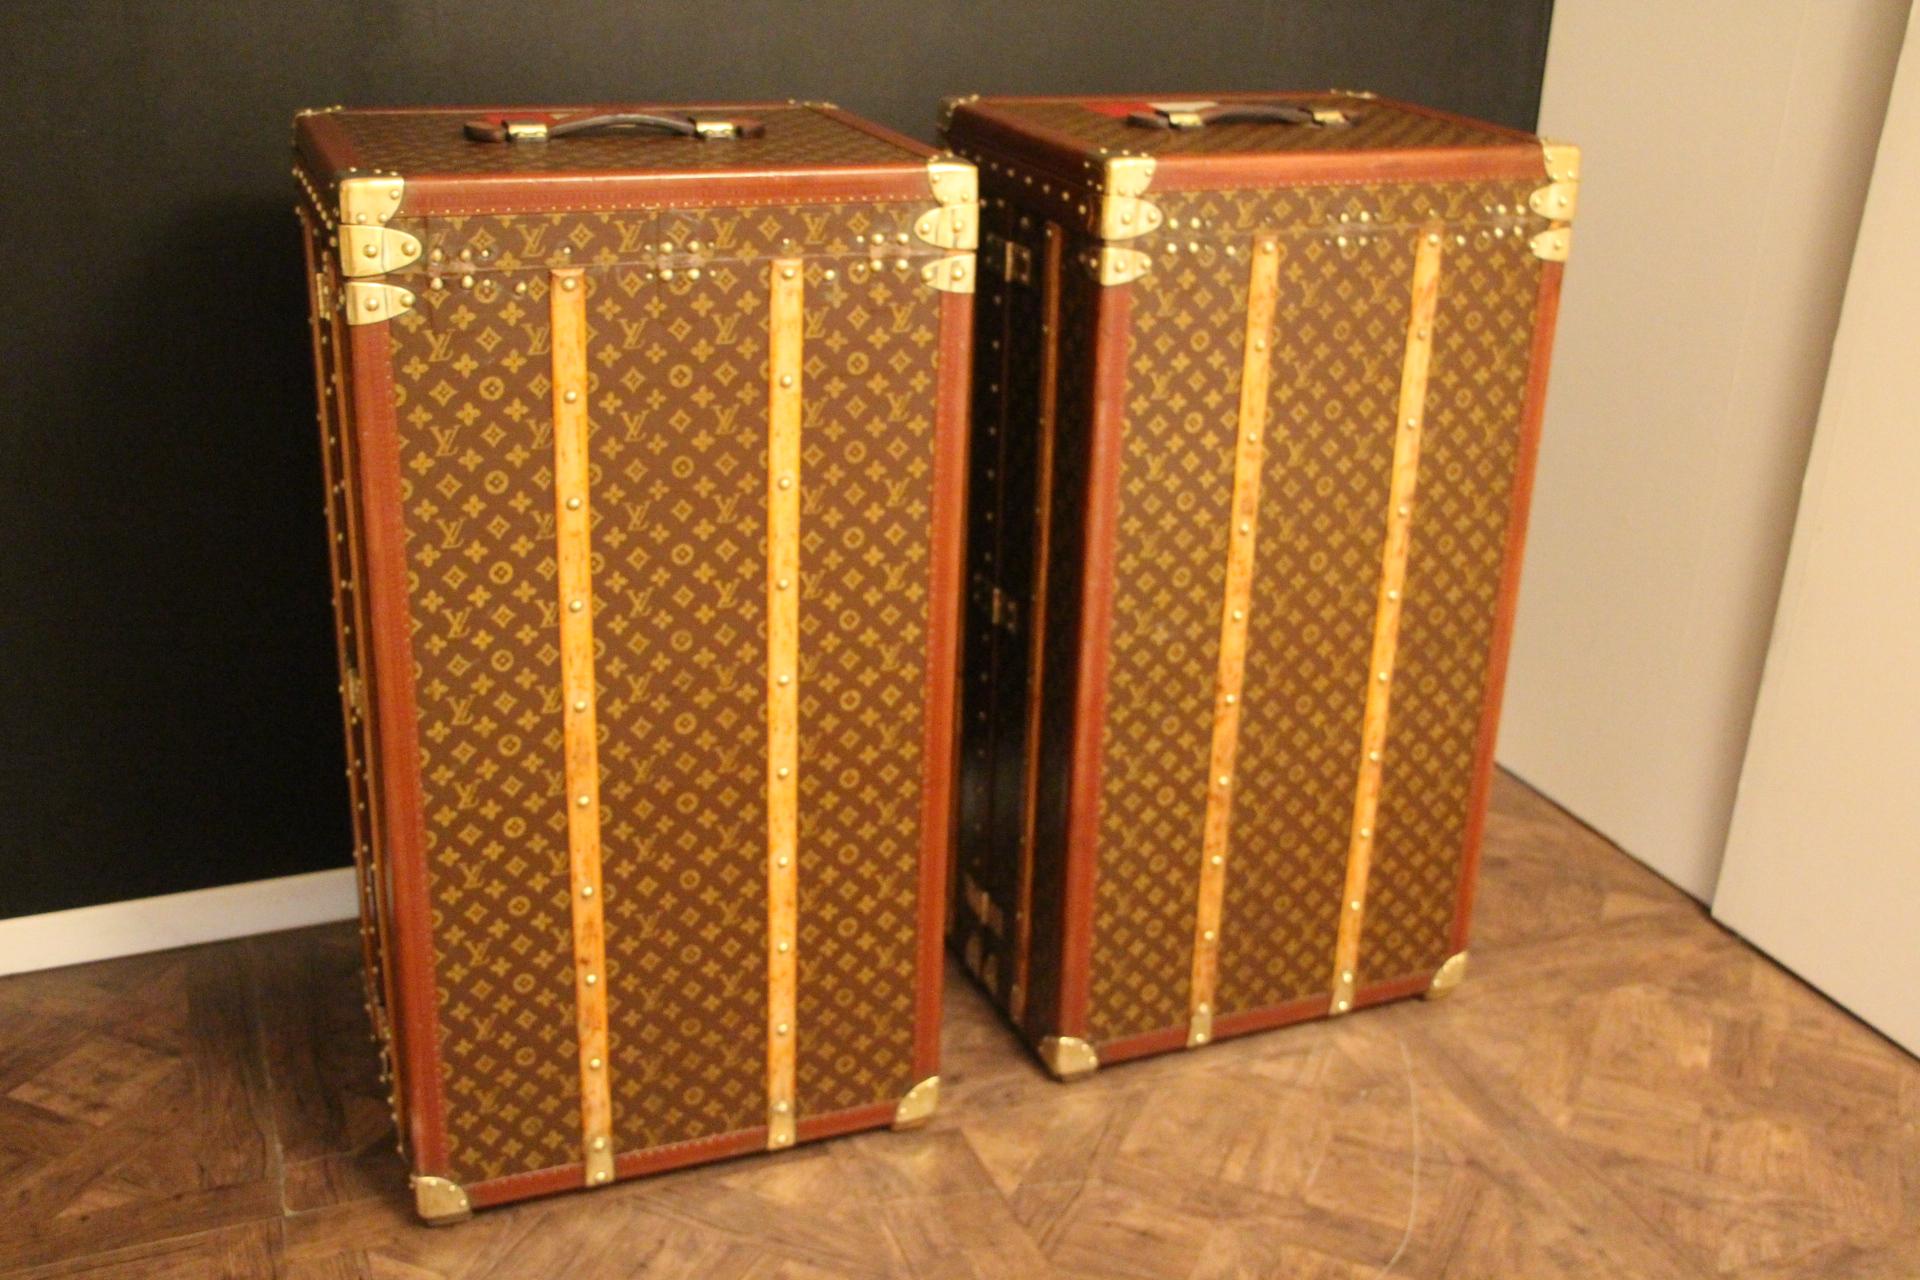 French Pair of Louis Vuitton Trunks, Pair of Louis Vuitton Steamer Trunks, LV Wardrobes